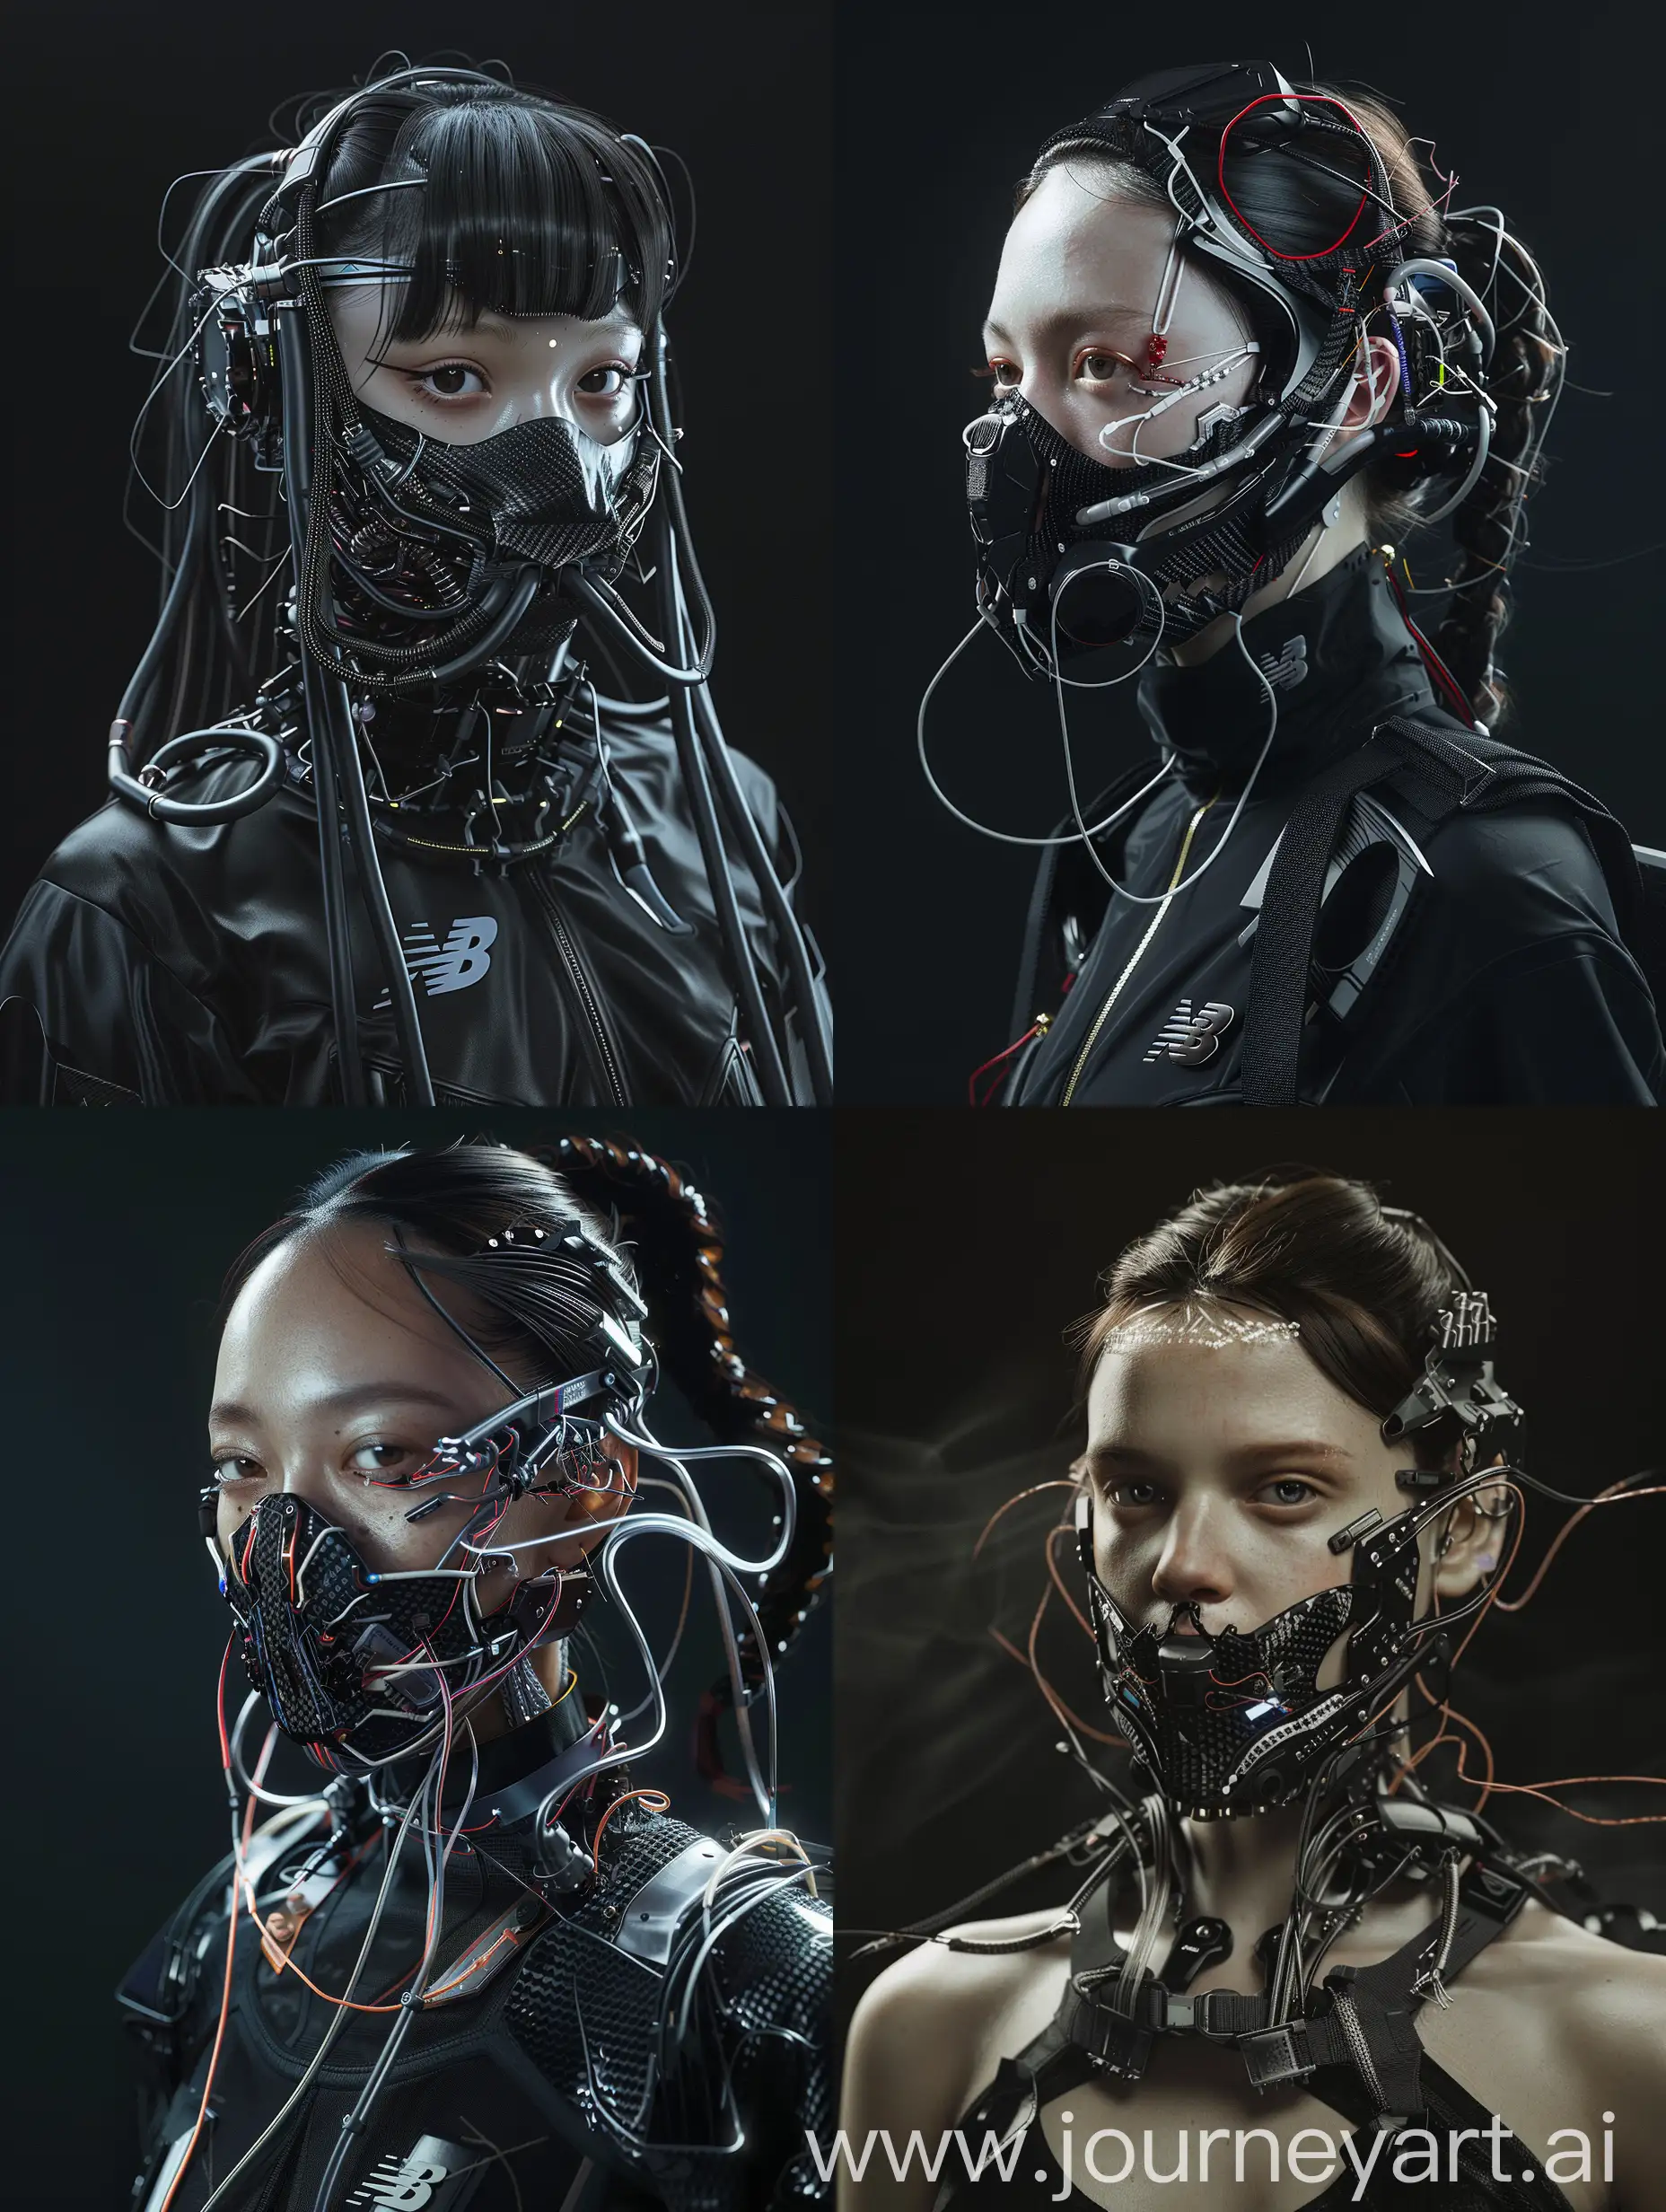 Futuristic-Cyberpunk-Beauty-with-Carbon-Fiber-Mask-in-Dynamic-Motion